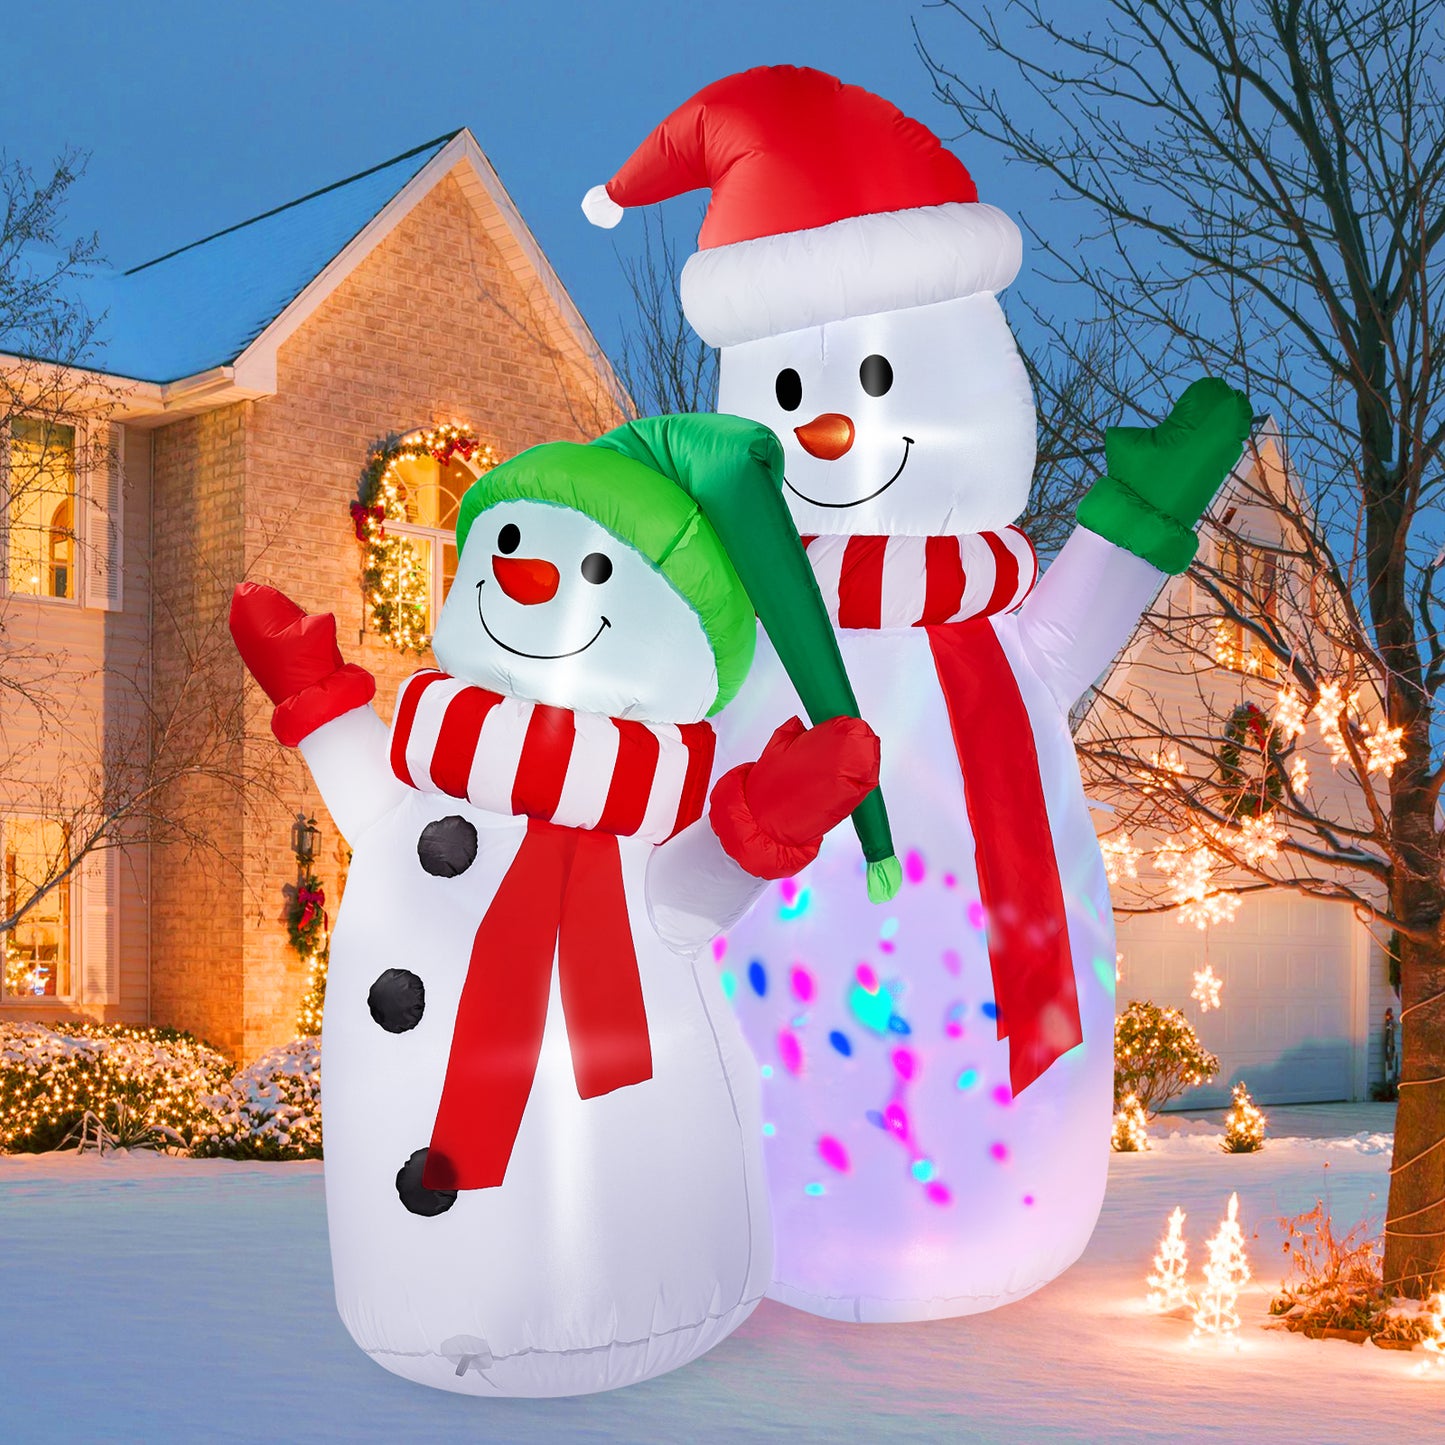 Christmas Decorations, CAMULAND 6FT Christmas Blow Up Yard Decorations Outdoor Inflatables Ornaments Snowman with Built-in LED Lights, Large Christmas Decor for Garden Party Indoor